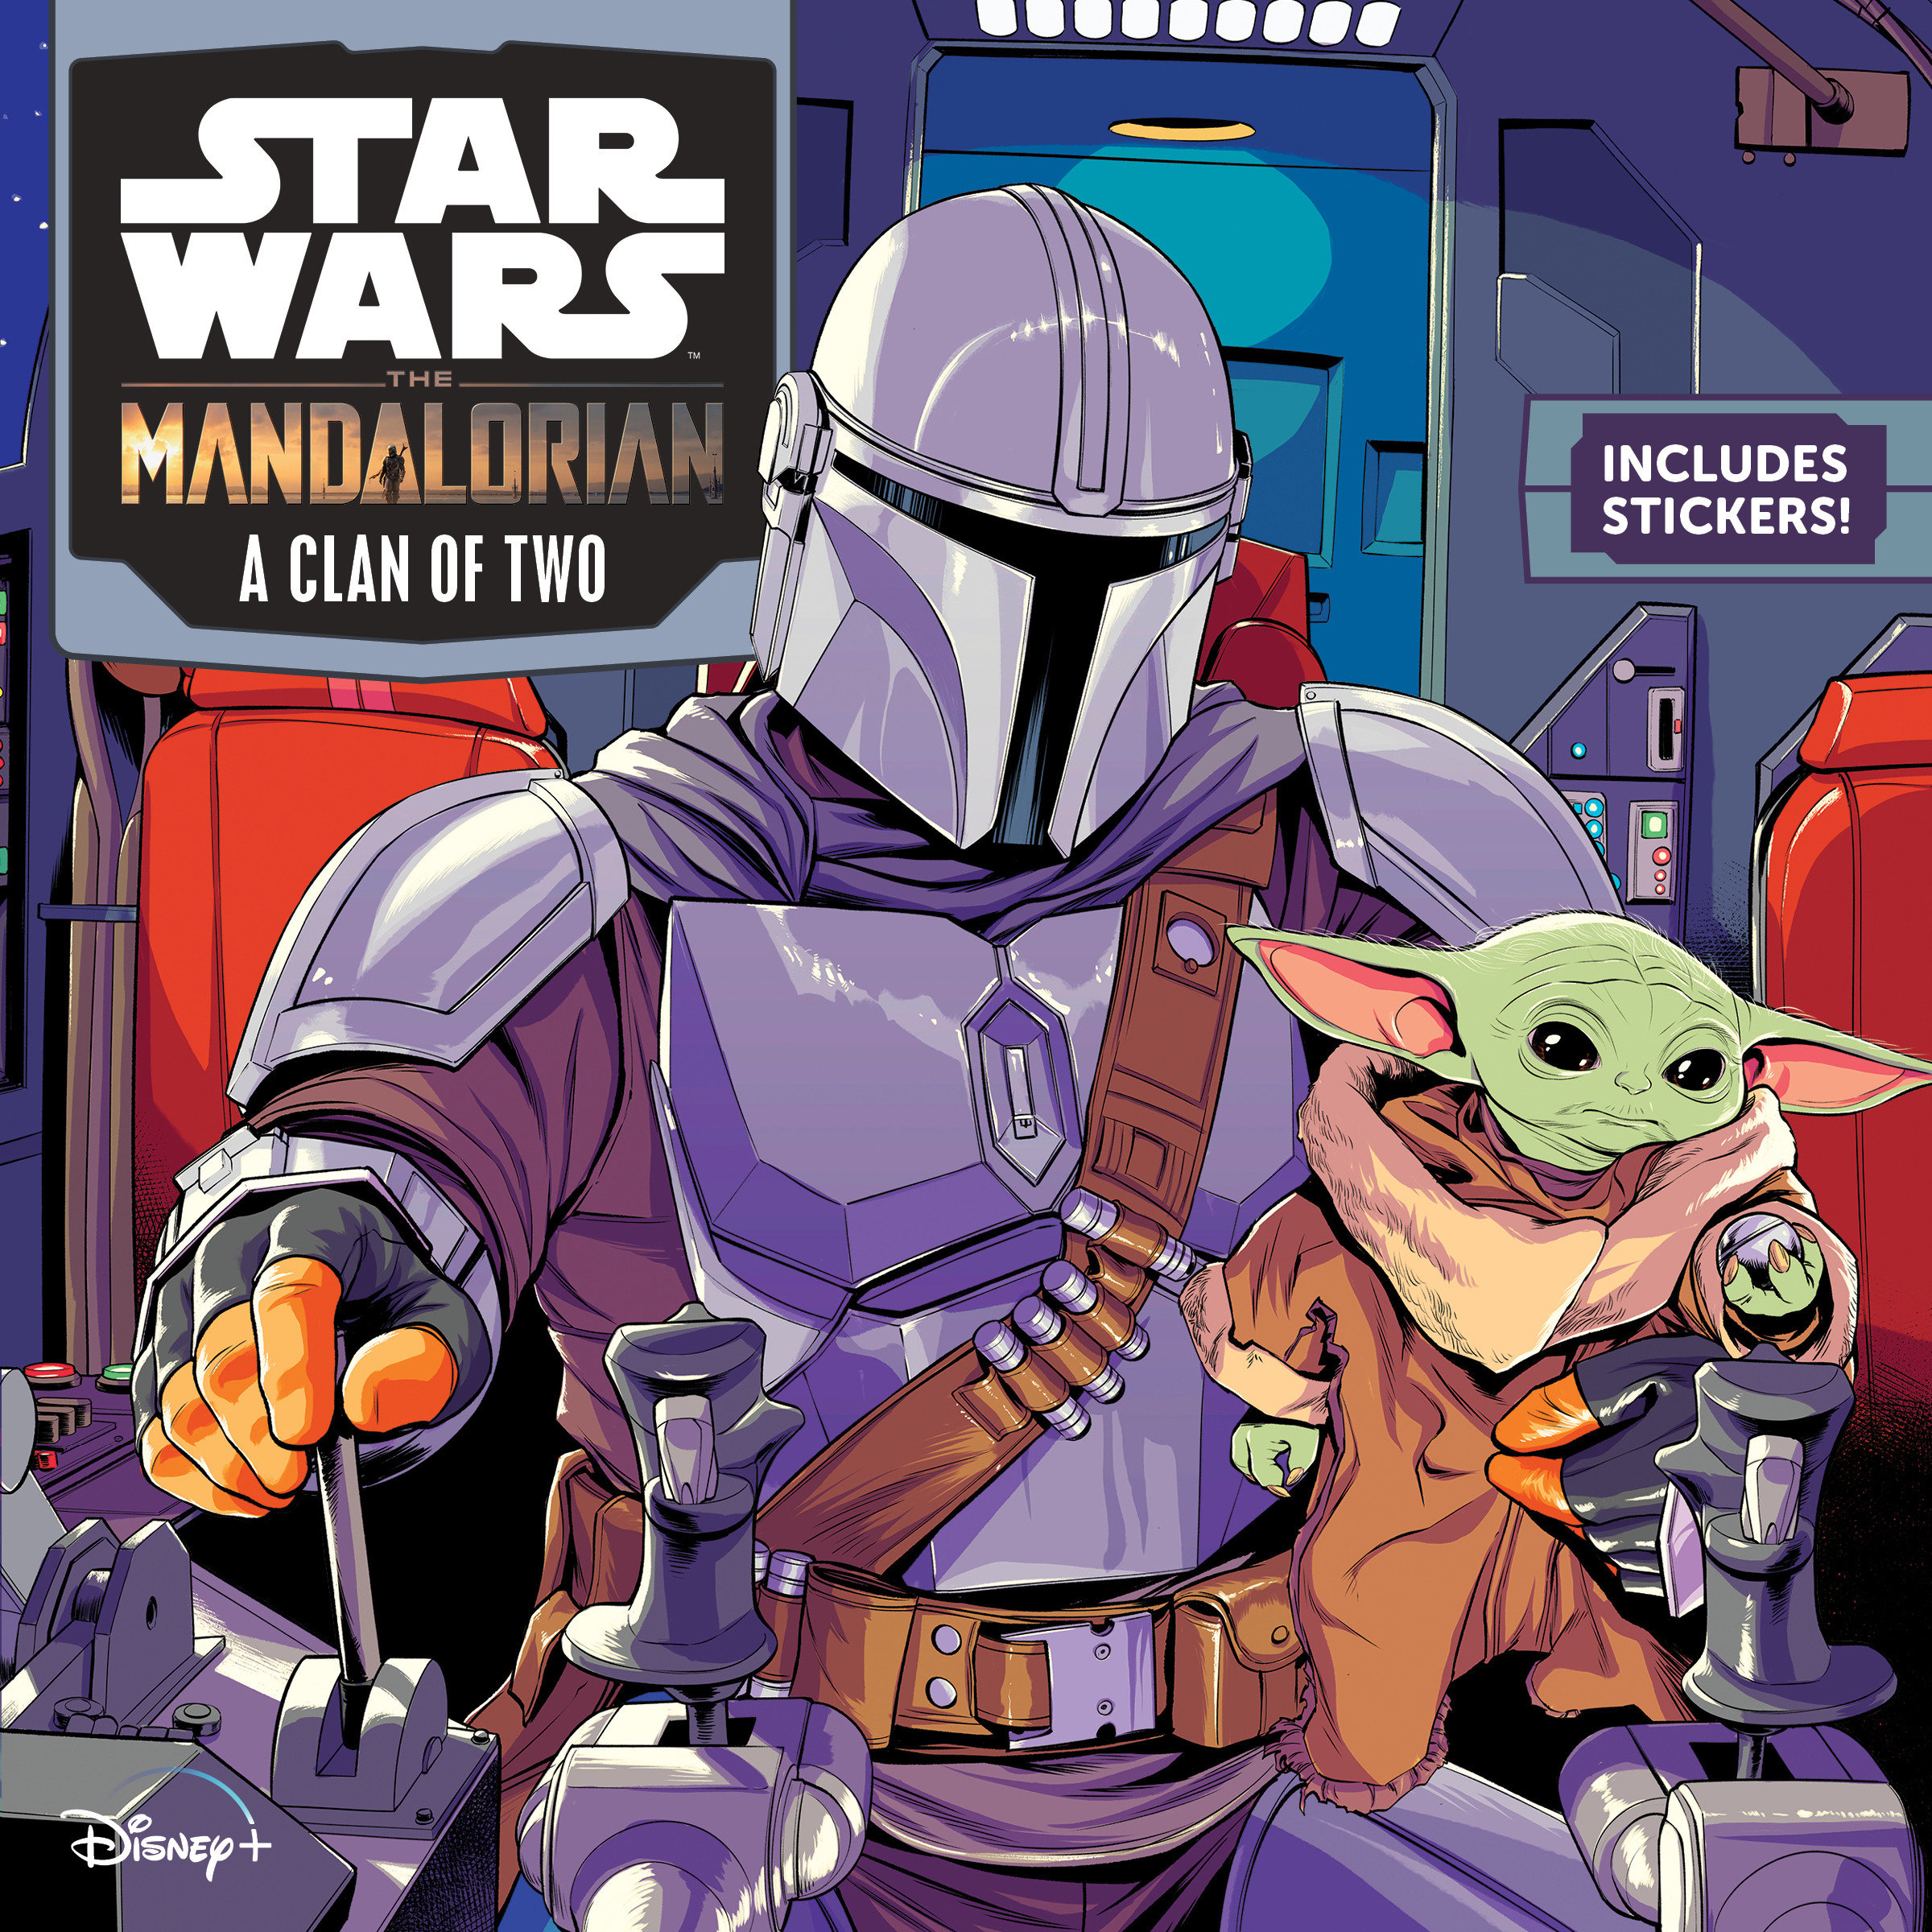 Star Wars The Mandalorian: A Clan of Two